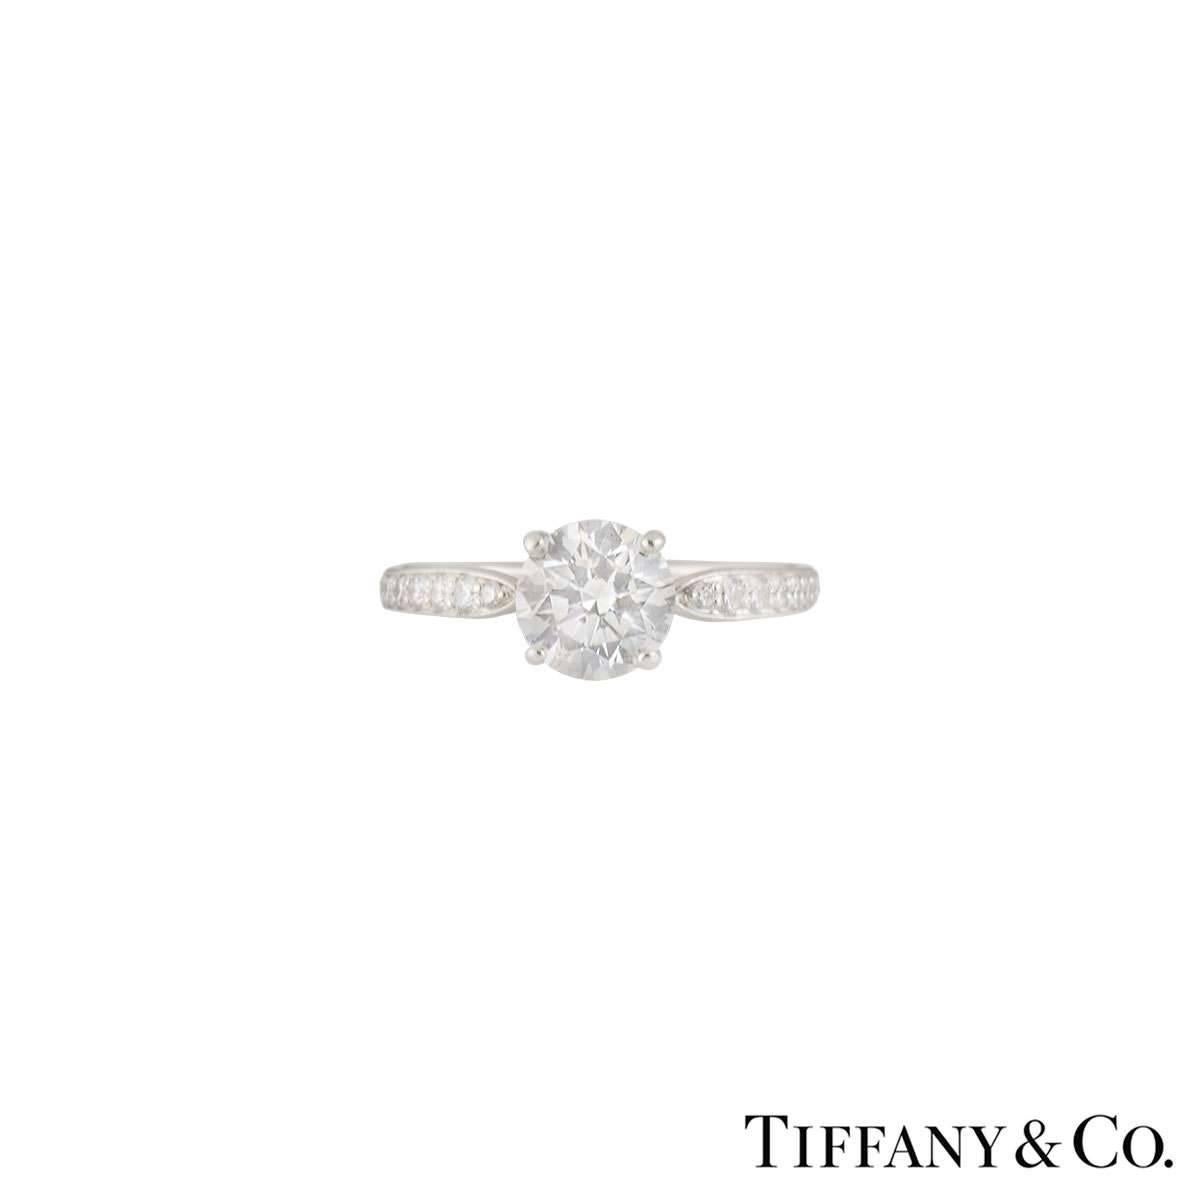 A beautiful platinum diamond Tiffany & Co. engagement ring from the Harmony collection. The ring comprises of a round brilliant cut diamond set to the centre in a 4 claw setting with a weight of 1.05ct, G colour and VS2 clarity. The diamond scores